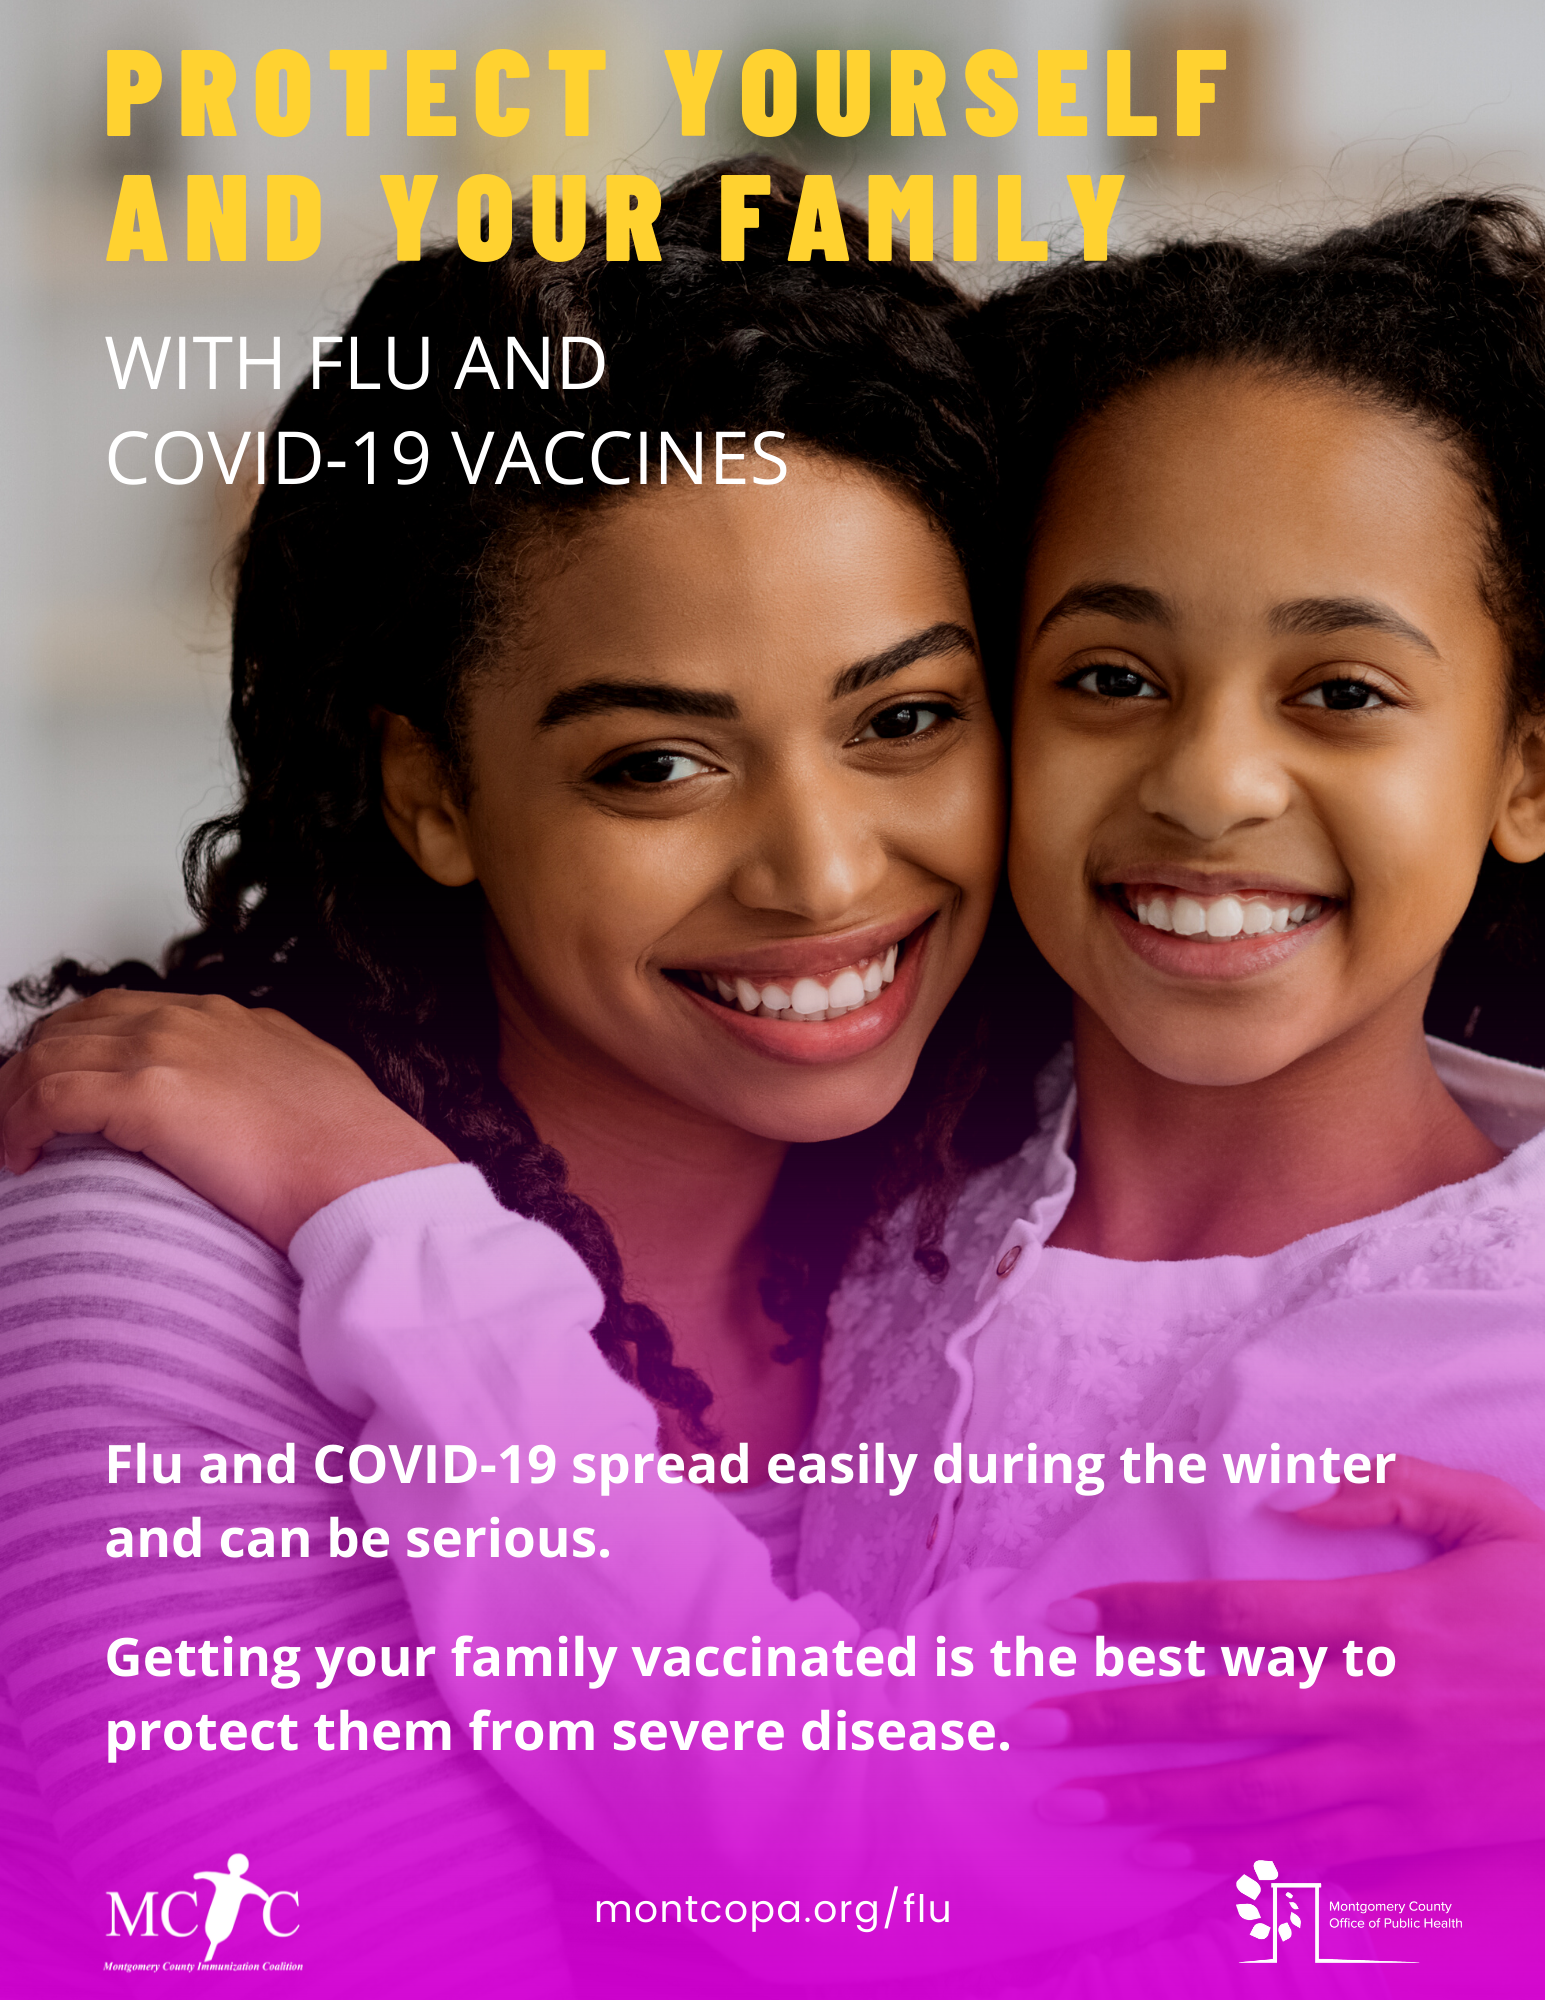 A Black mother and daughter embrace and smile. Text reads, "Protect yourself and your family with flu and covid-19 vaccines. Flu and COVID-19 spread easily during the winter and can be serious. Getting your family vaccinated is the best way to protect them from severe disease."